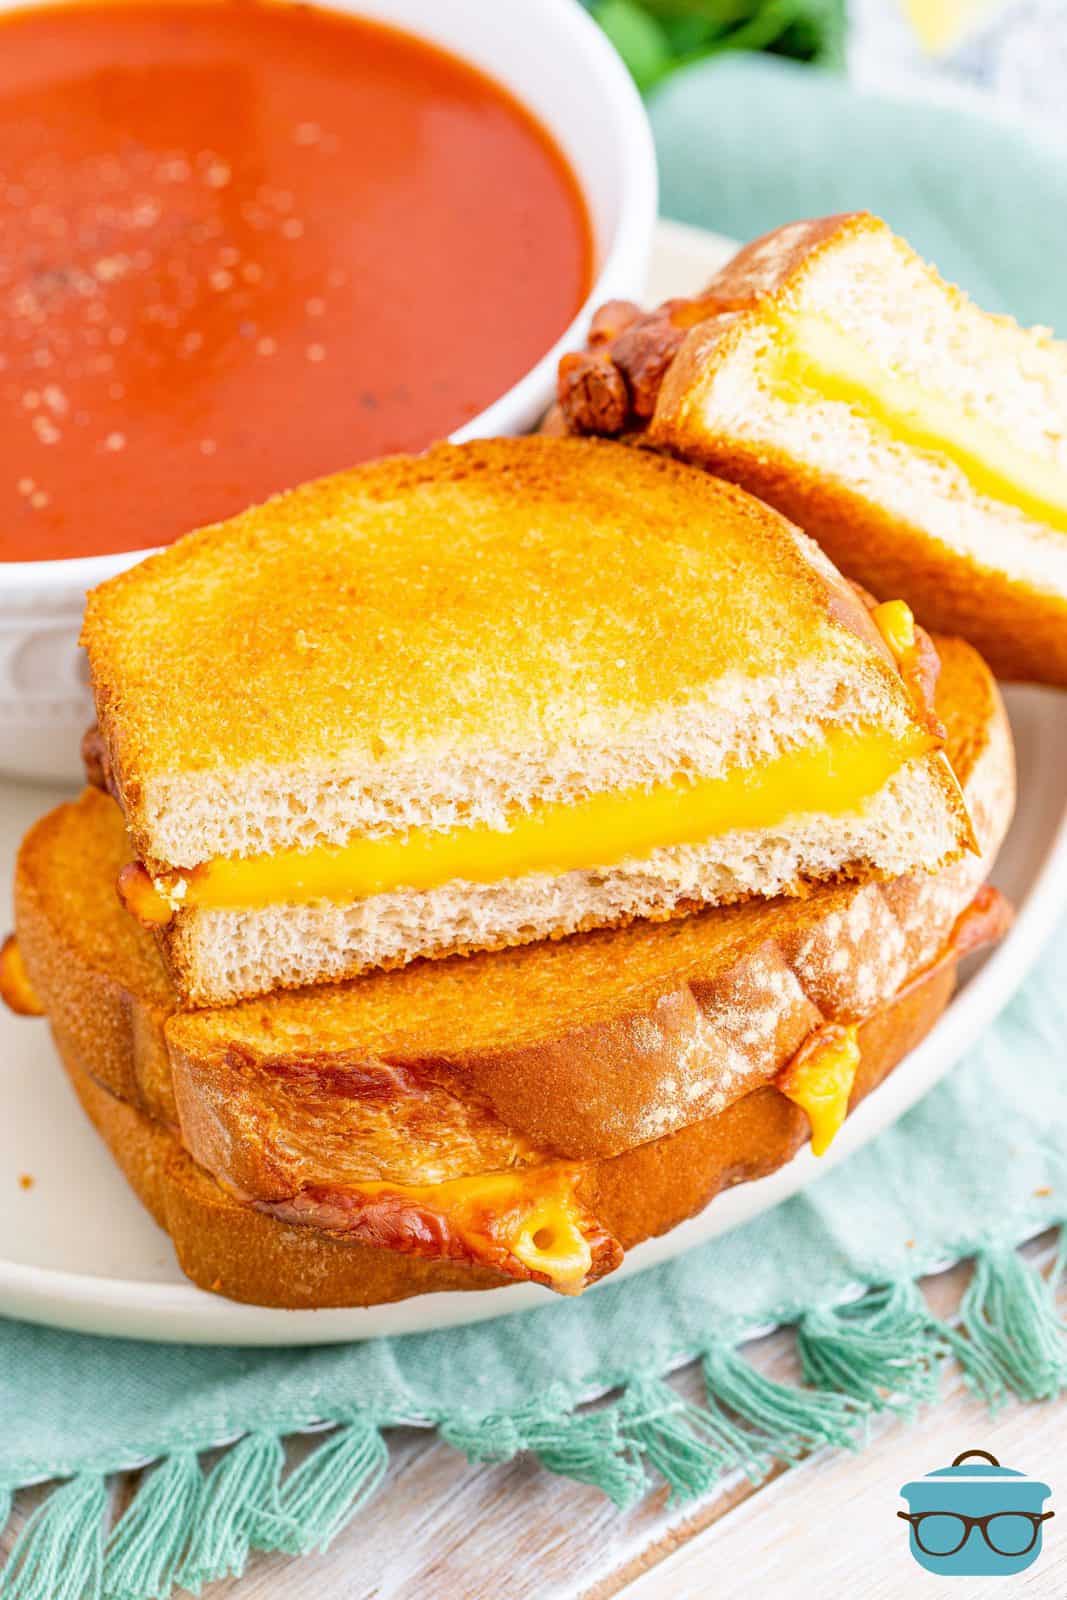 Stacked Air Fryer Grilled Cheese on plate with side of tomato soup.